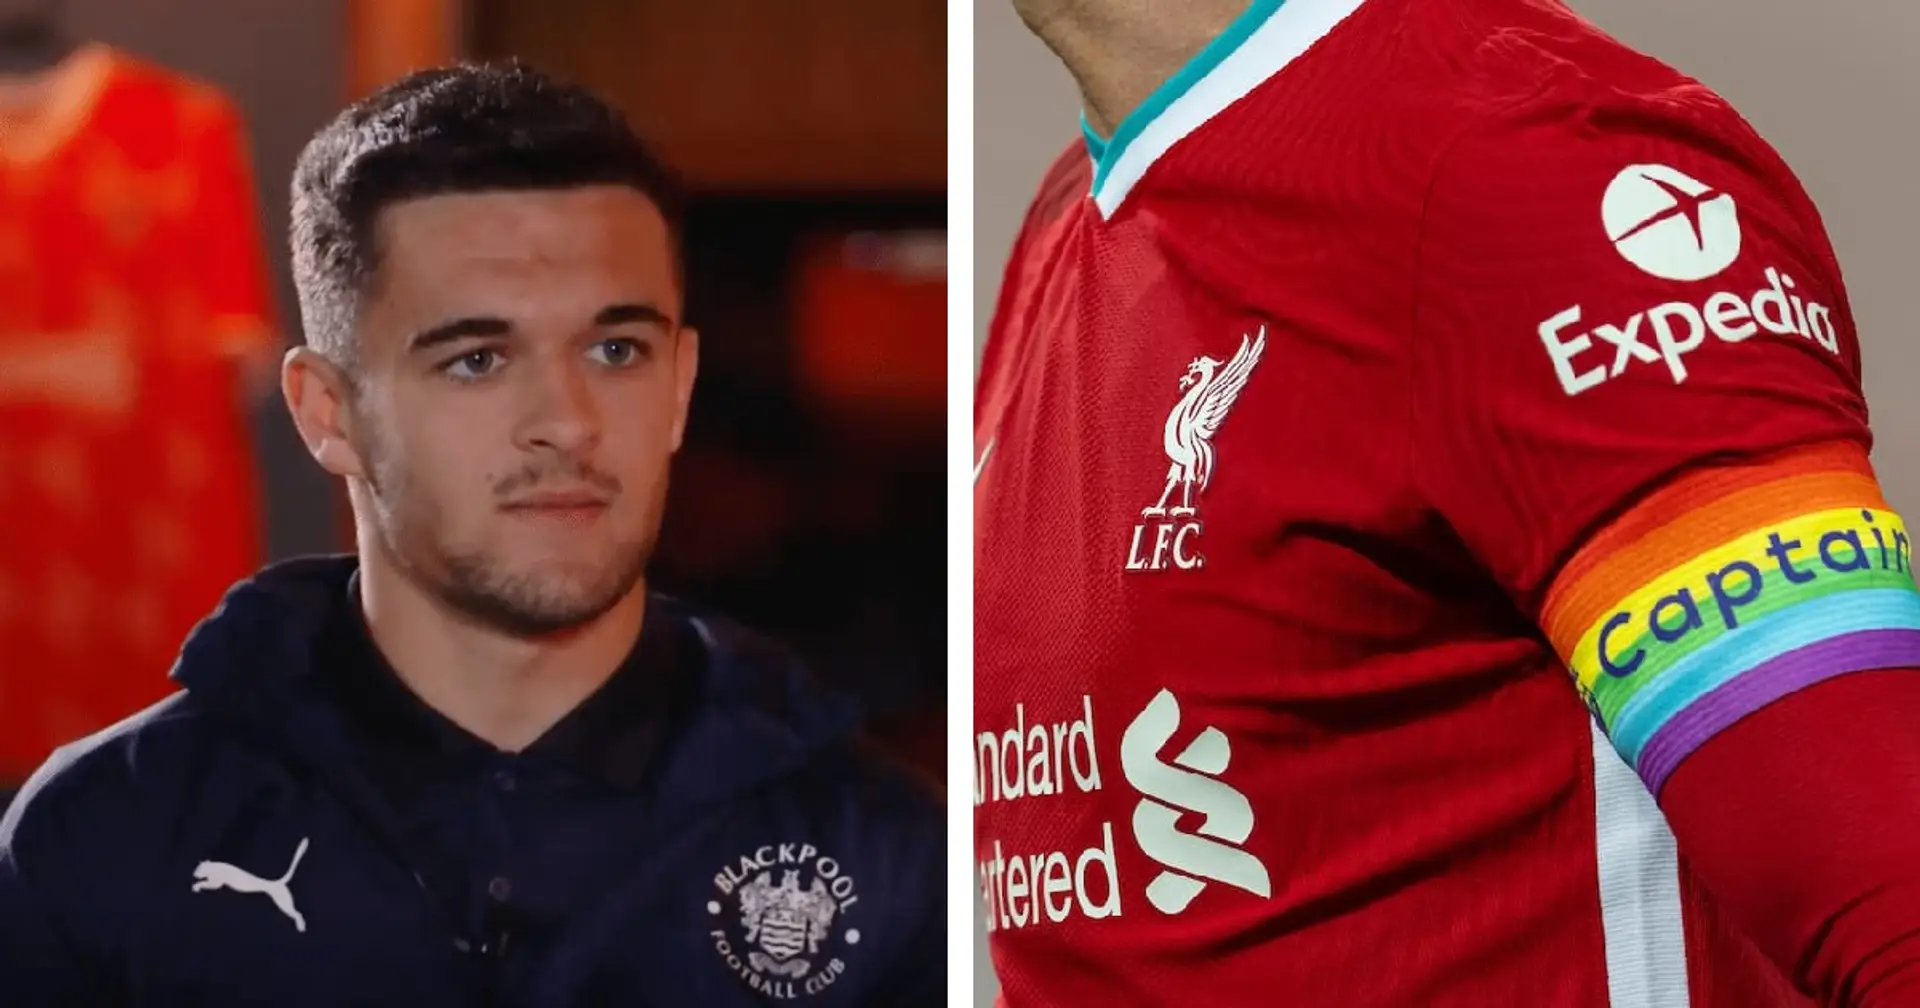 'We'd be happy to have a 30 goal a season gay striker!': Liverpool fans support Jake Daniels for coming out